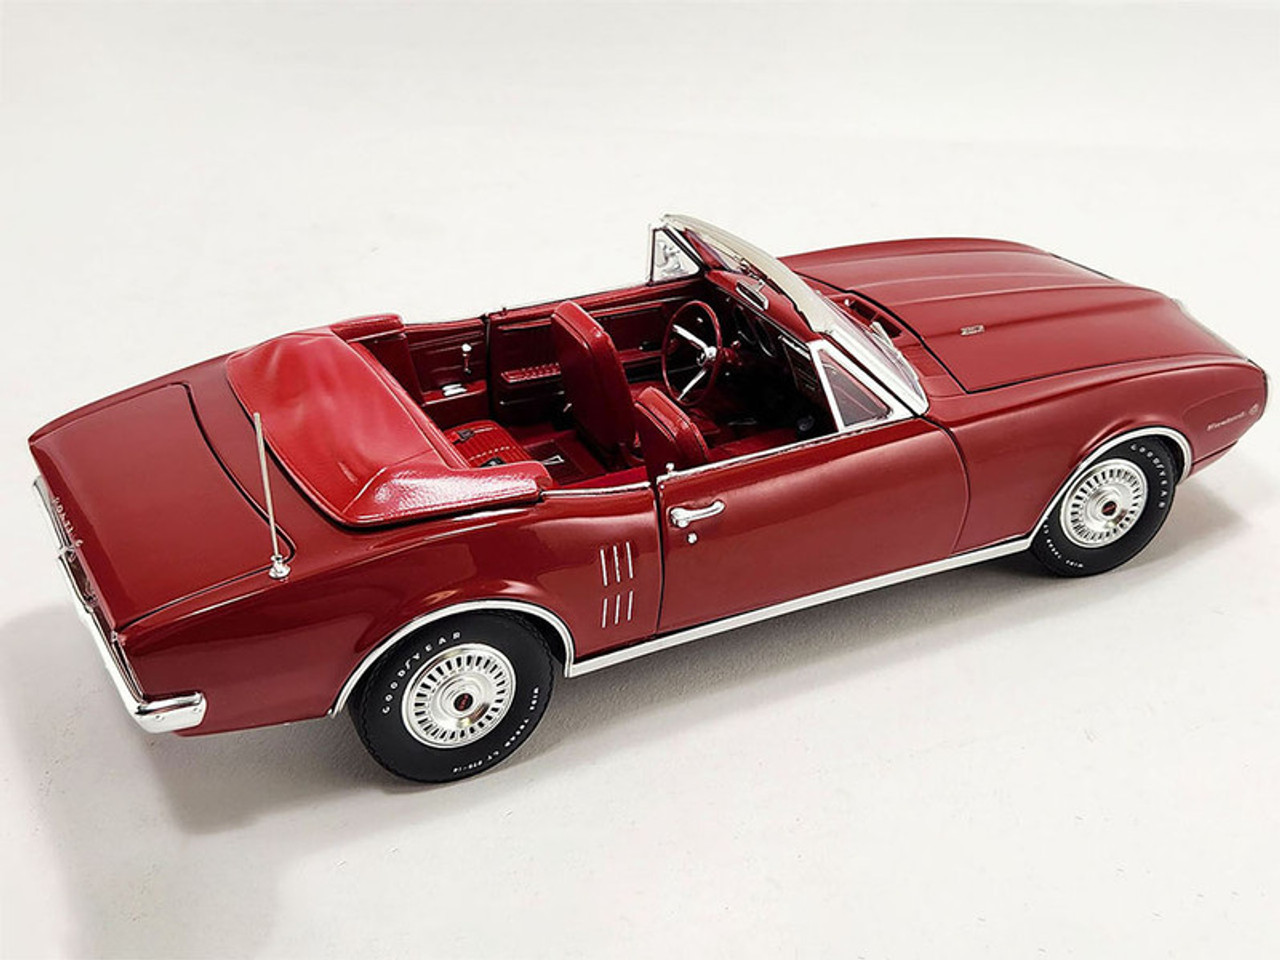 1967 Pontiac Firebird Convertible - Regimental Red with Black Top - "First Firebird Produced Serial #001" Limited Edition - 1:18 Diecast Model Car by ACME